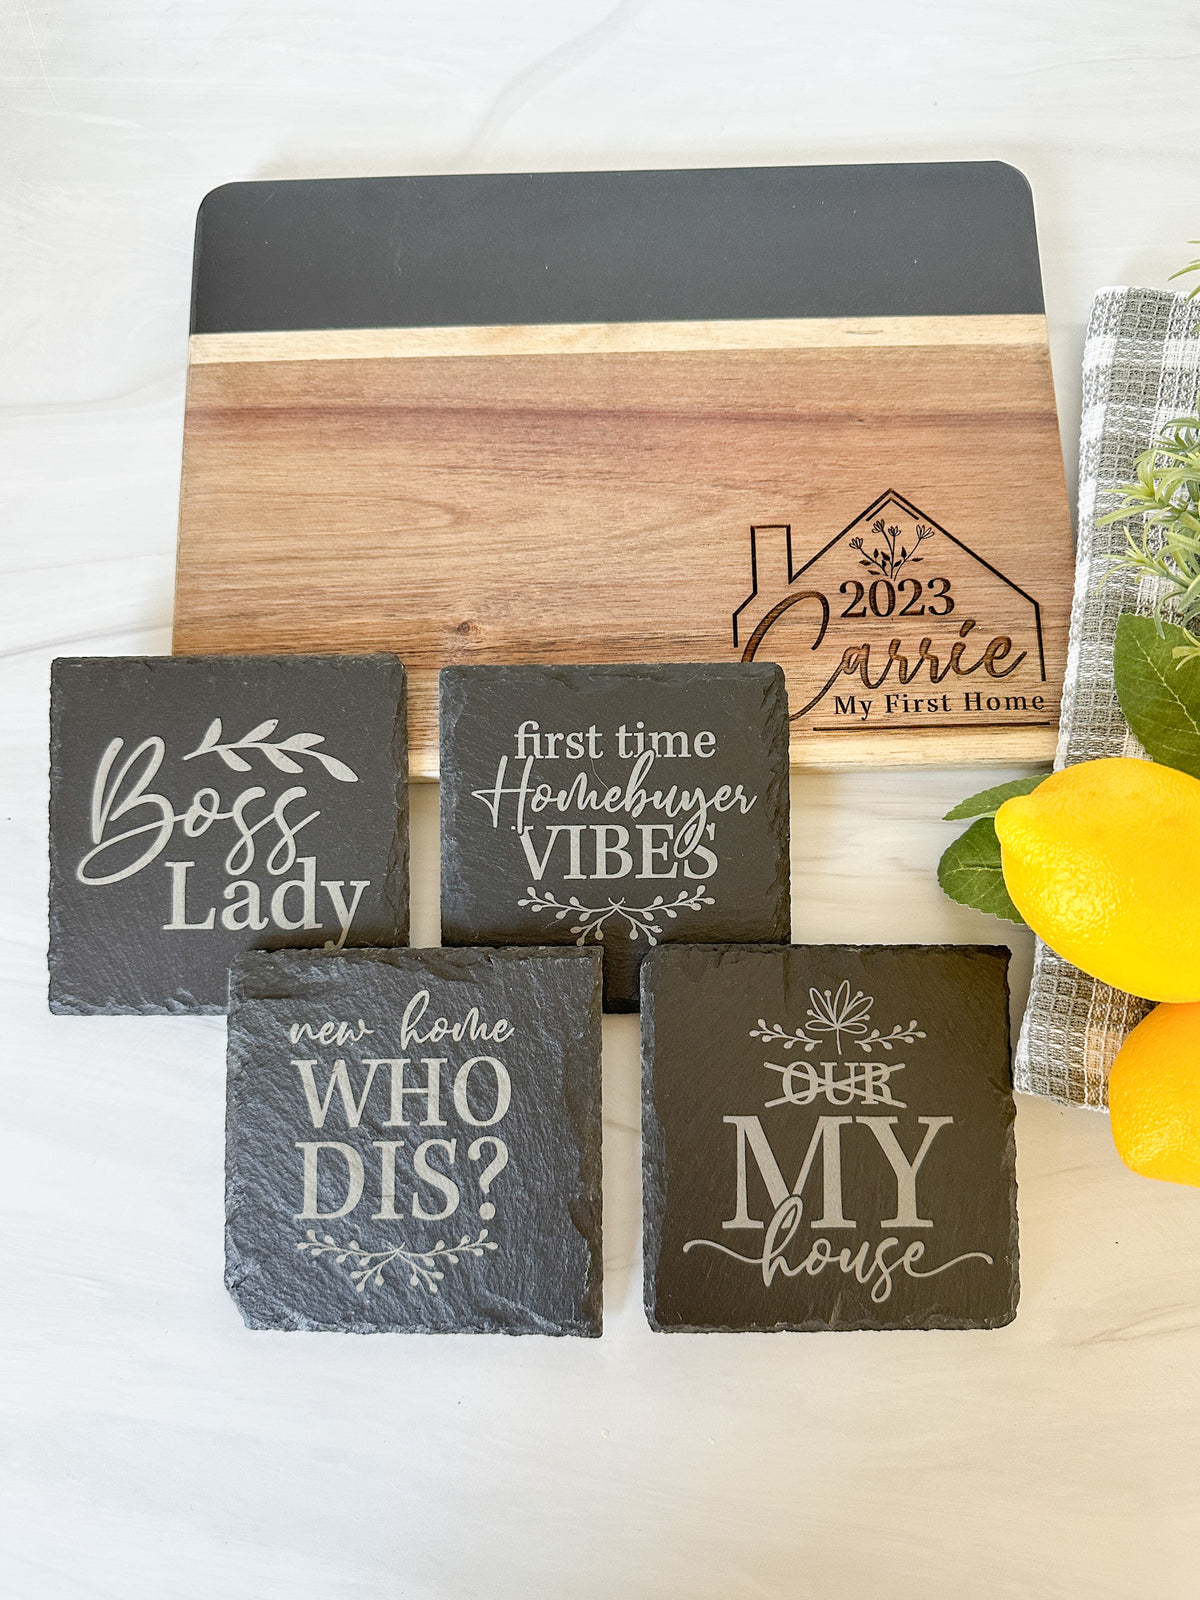 Personalized Engraved Slate + Acacia Wood Small Chopping Board